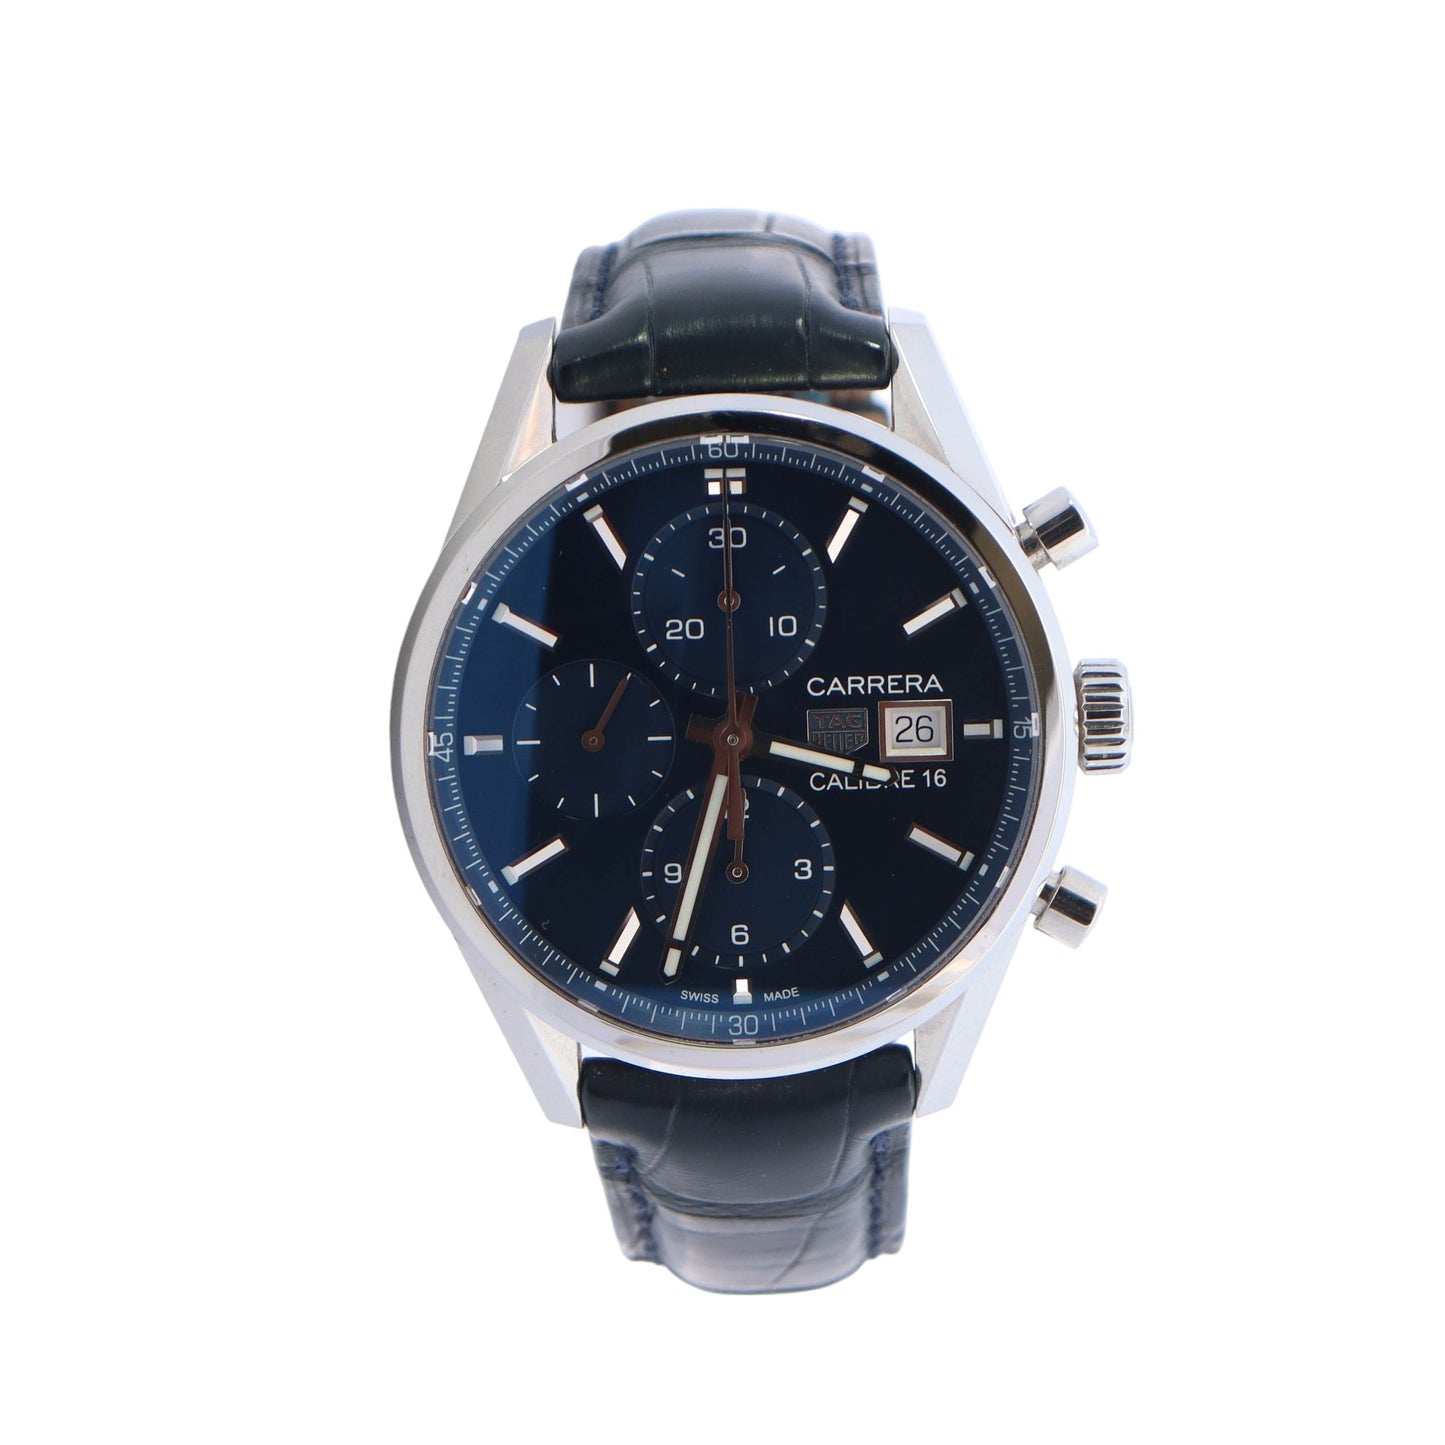 Tag Heuer Carrera Stainless Steel 41mm Blue Chronograph Dial Watch  Reference #: CBK2112.FC6292 - Happy Jewelers Fine Jewelry Lifetime Warranty